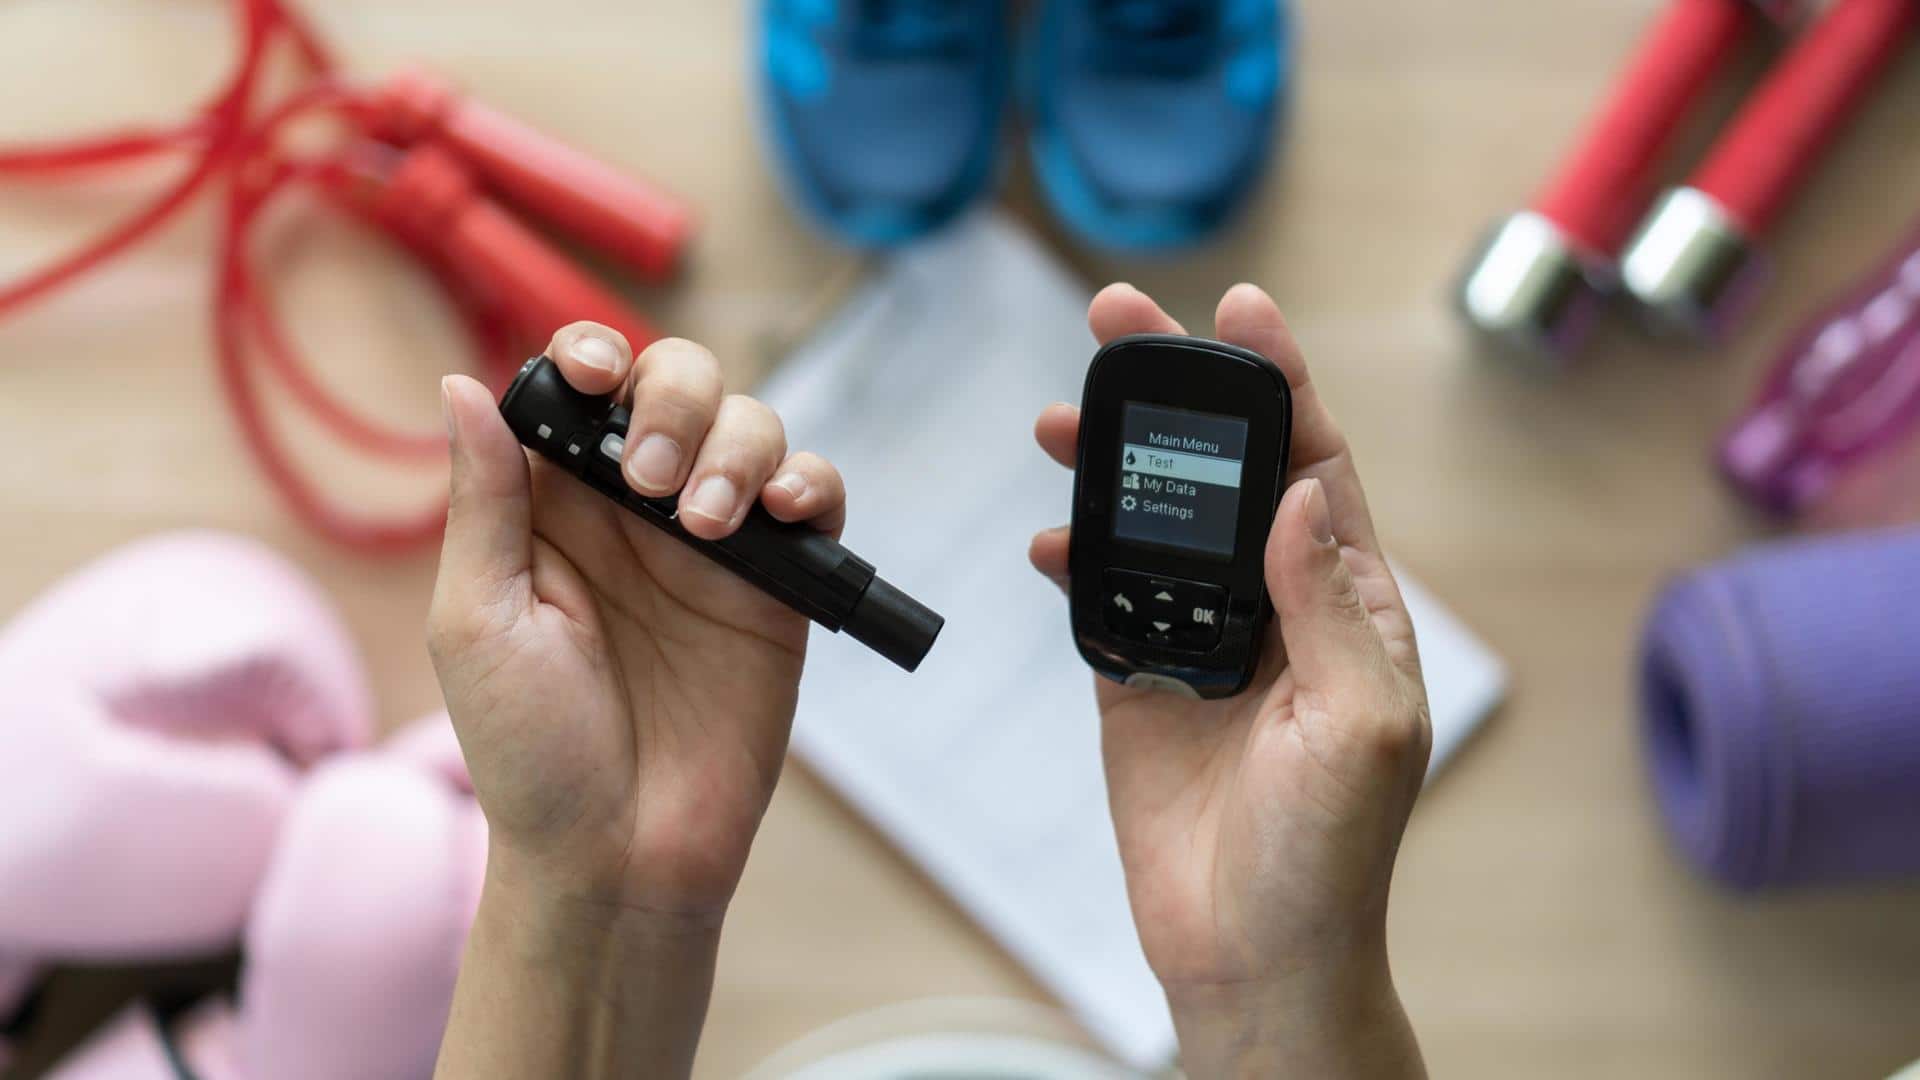 Exercise timing influences blood sugar control, finds study